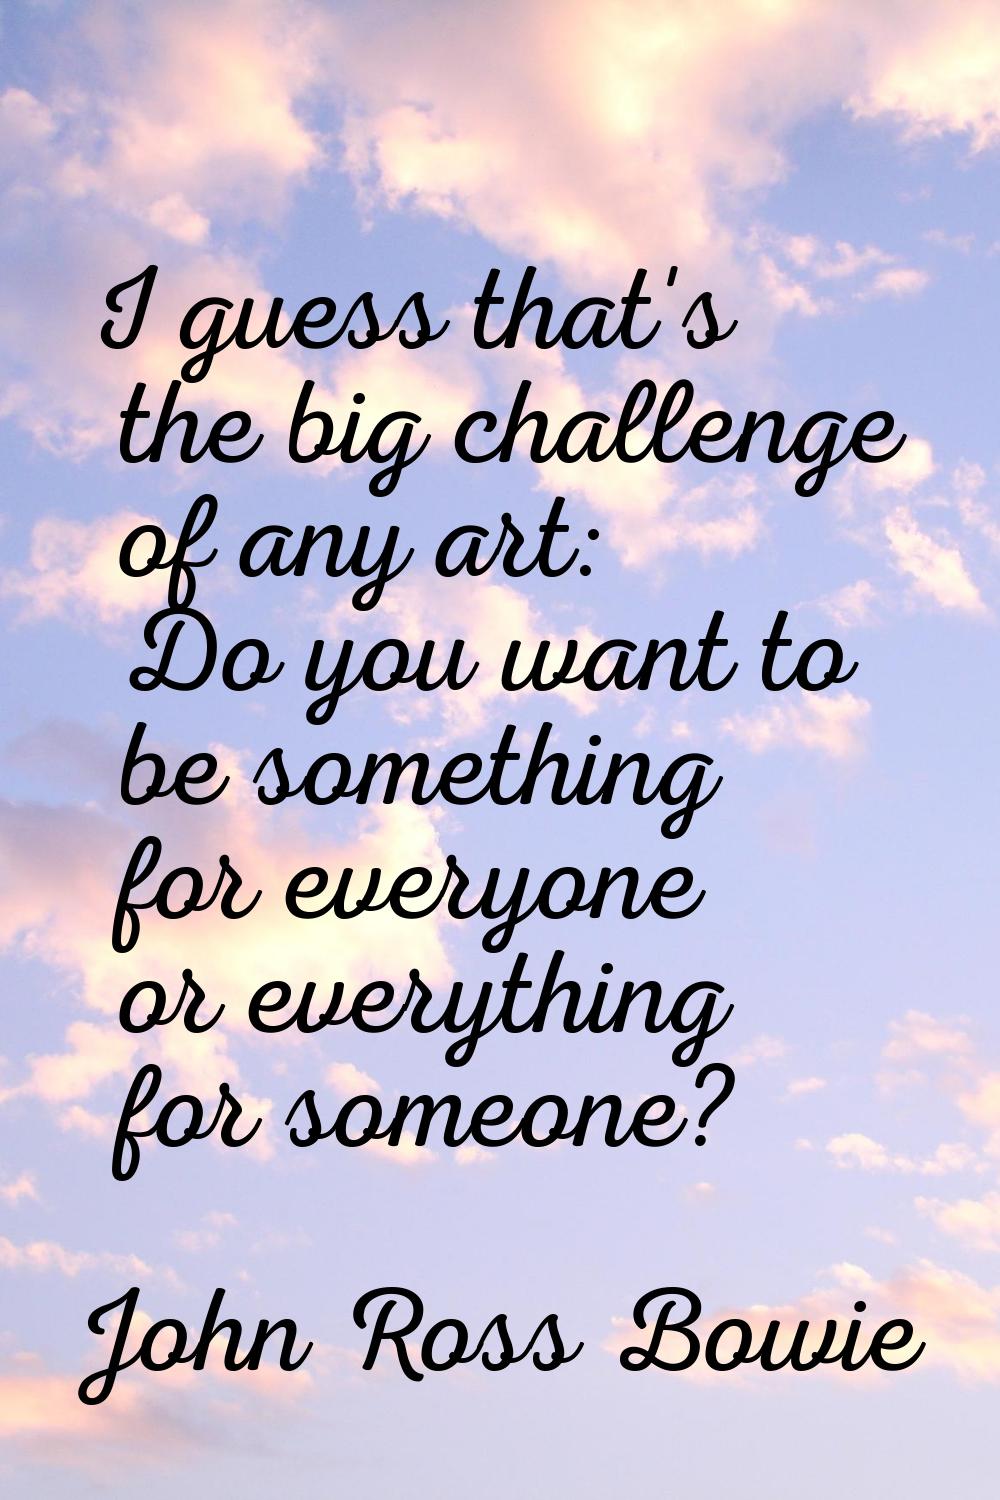 I guess that's the big challenge of any art: Do you want to be something for everyone or everything